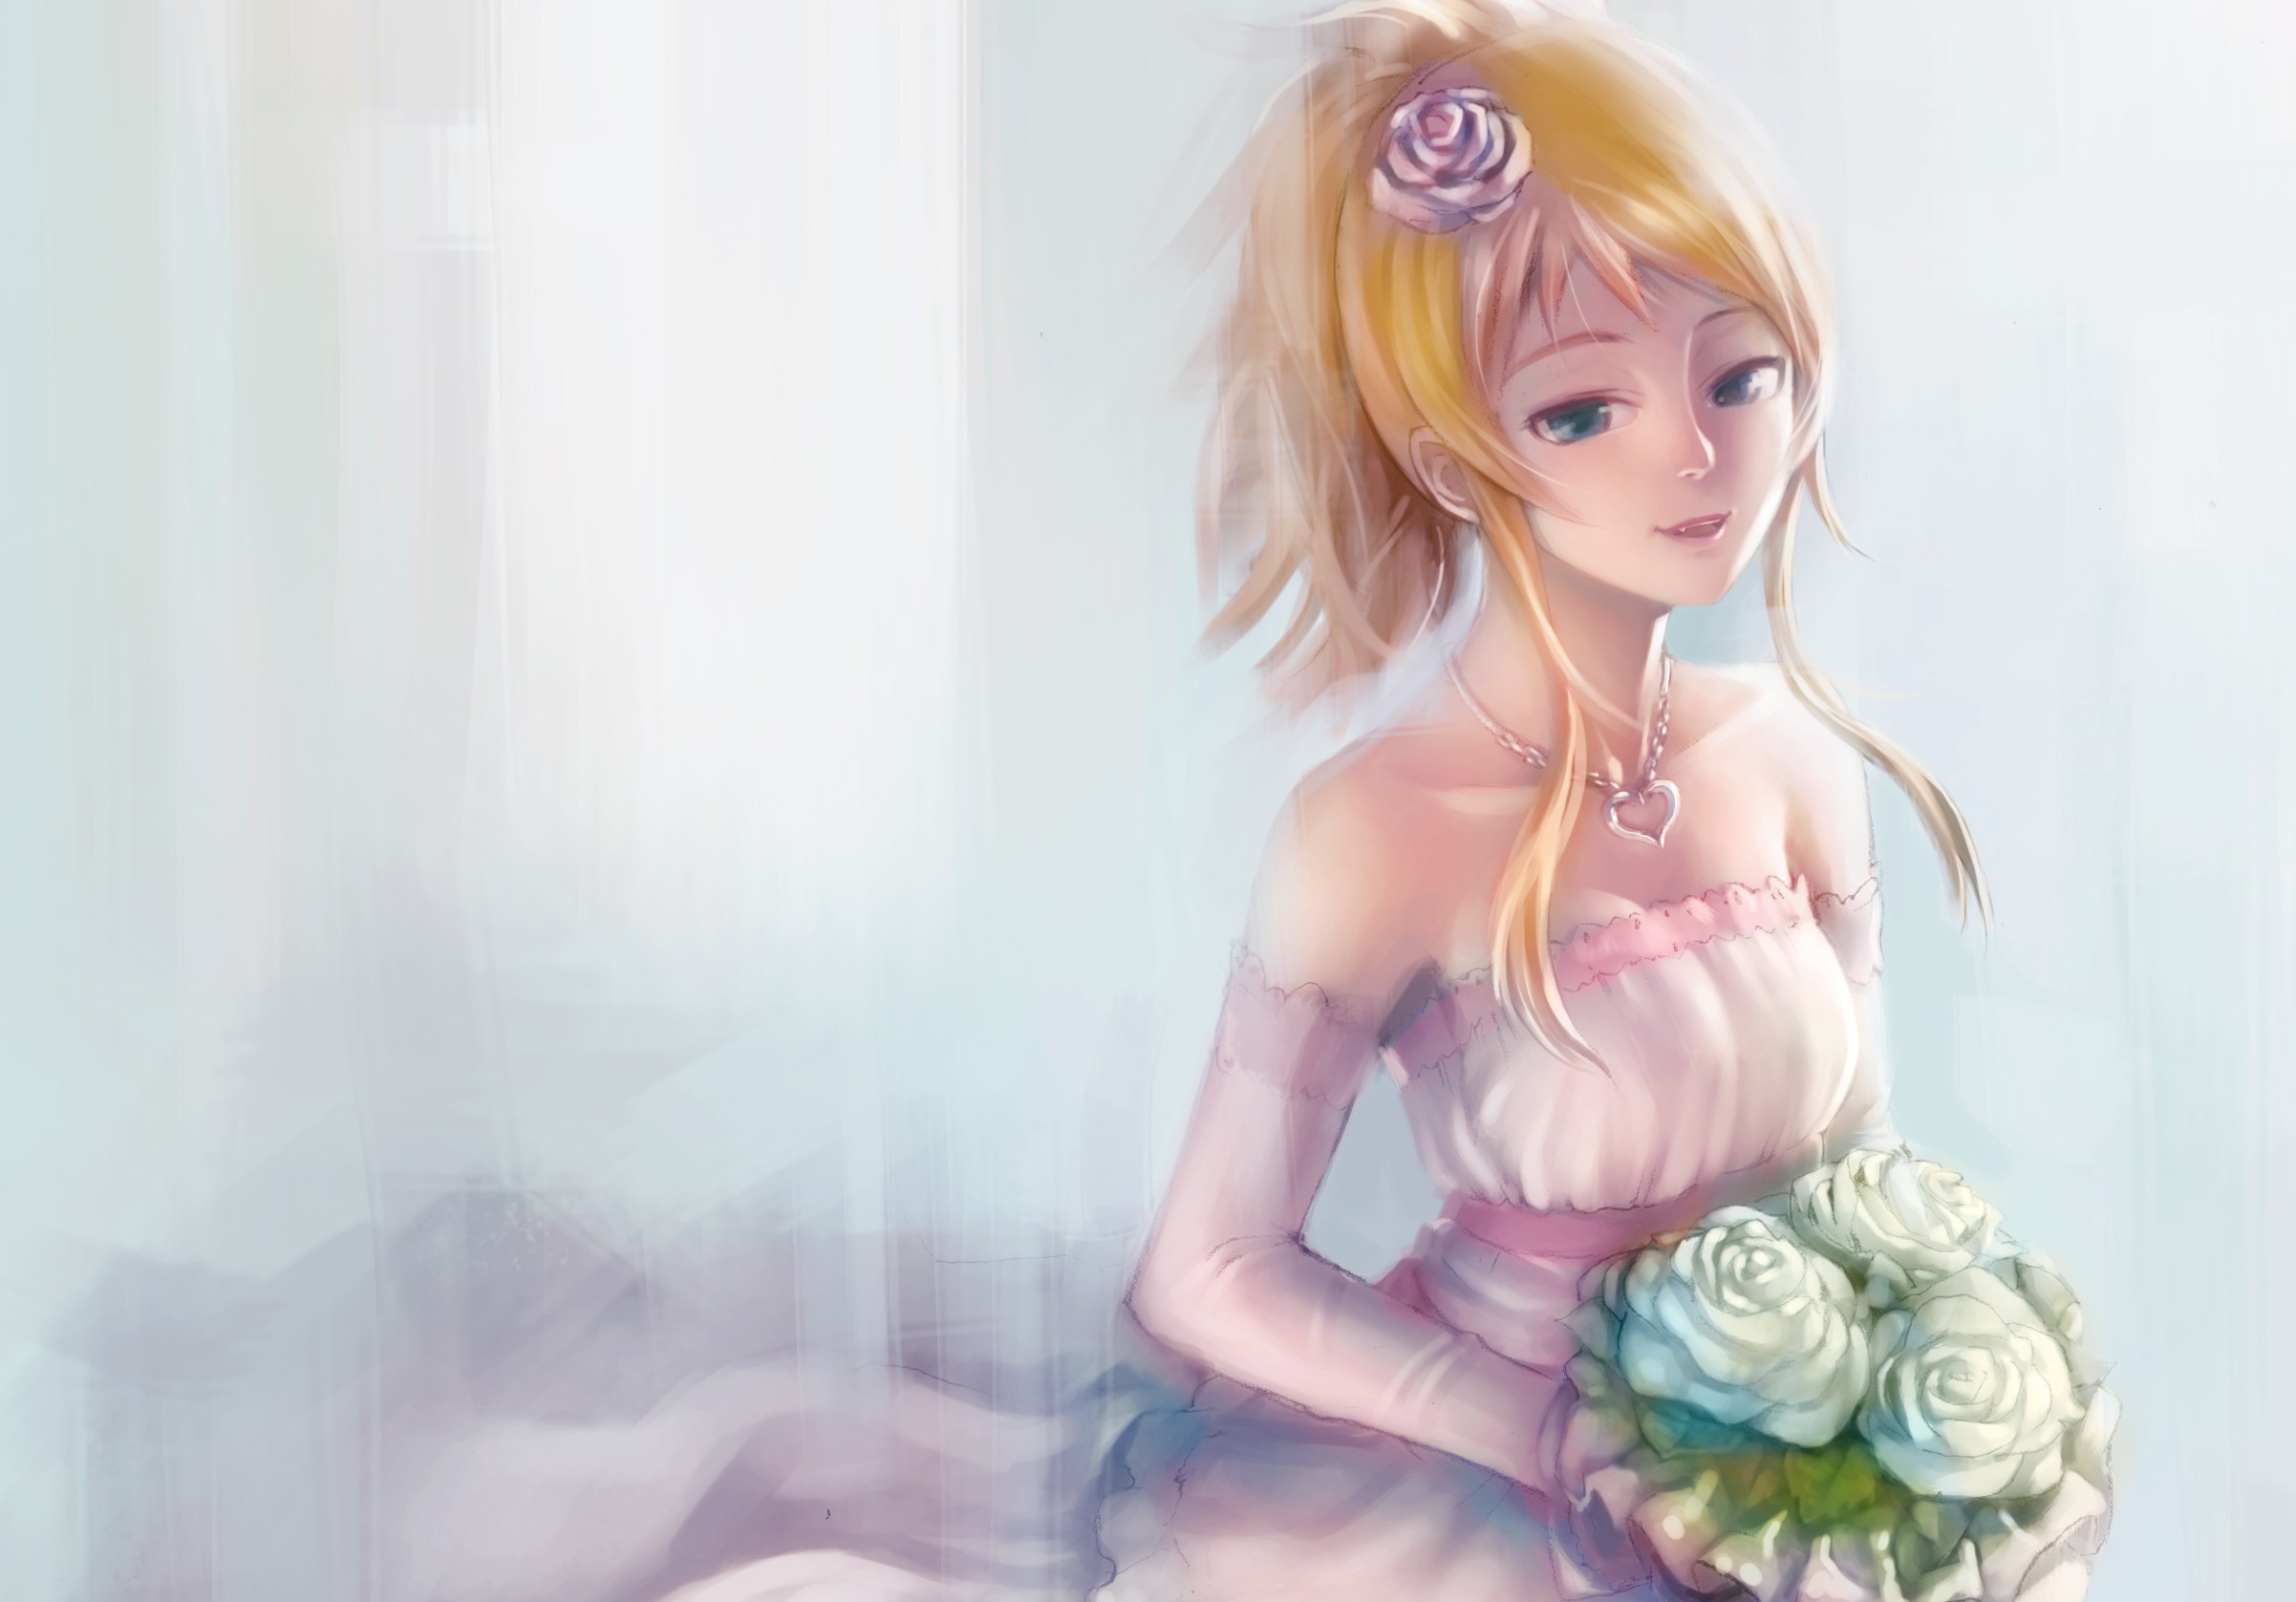 Oreimo HD Wallpaper by Chi-Hsien Hsieh